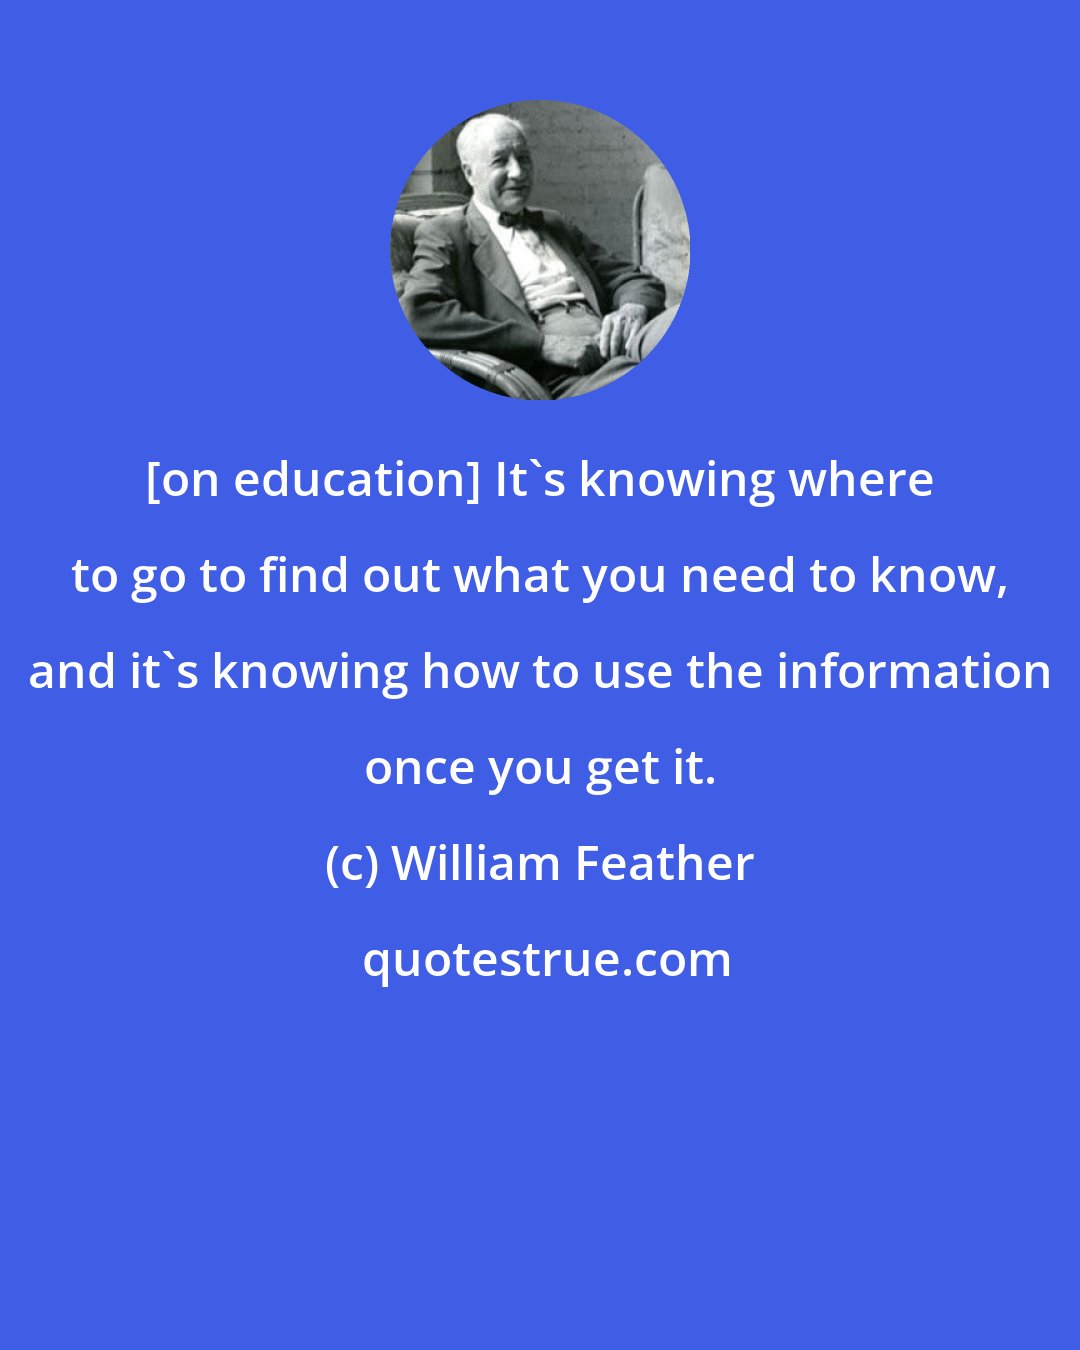 William Feather: [on education] It's knowing where to go to find out what you need to know, and it's knowing how to use the information once you get it.